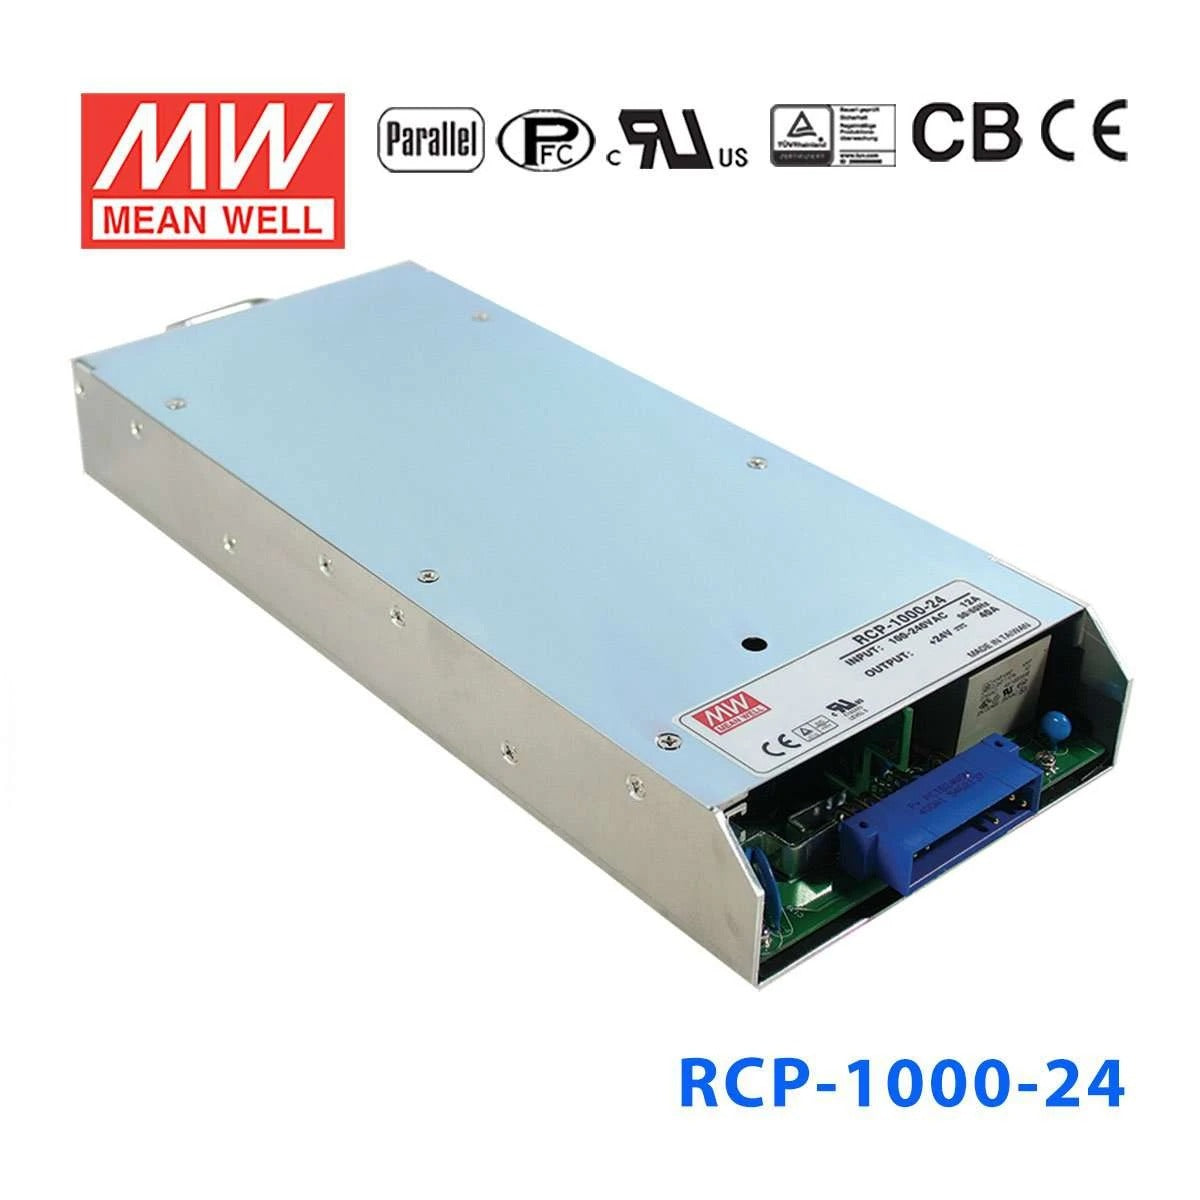 Mean Well RCP-1600-24 power supply 1600W 24V 67A